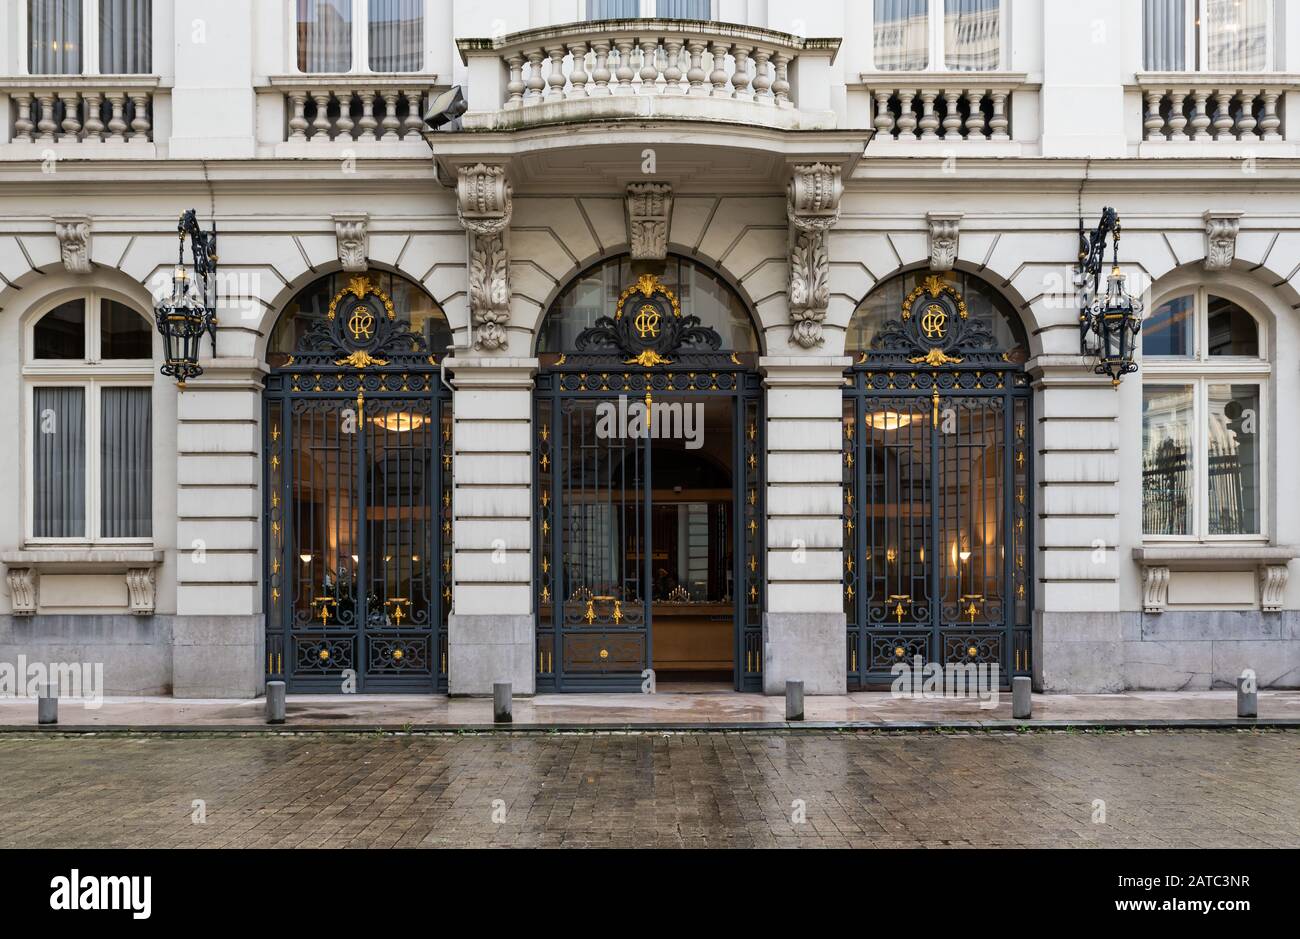 Brussels Old Town, Brussels Capital Region / Belgium - 12 20 2019: Neo classical entrance and facade of the Court of Audit of Belgium Stock Photo